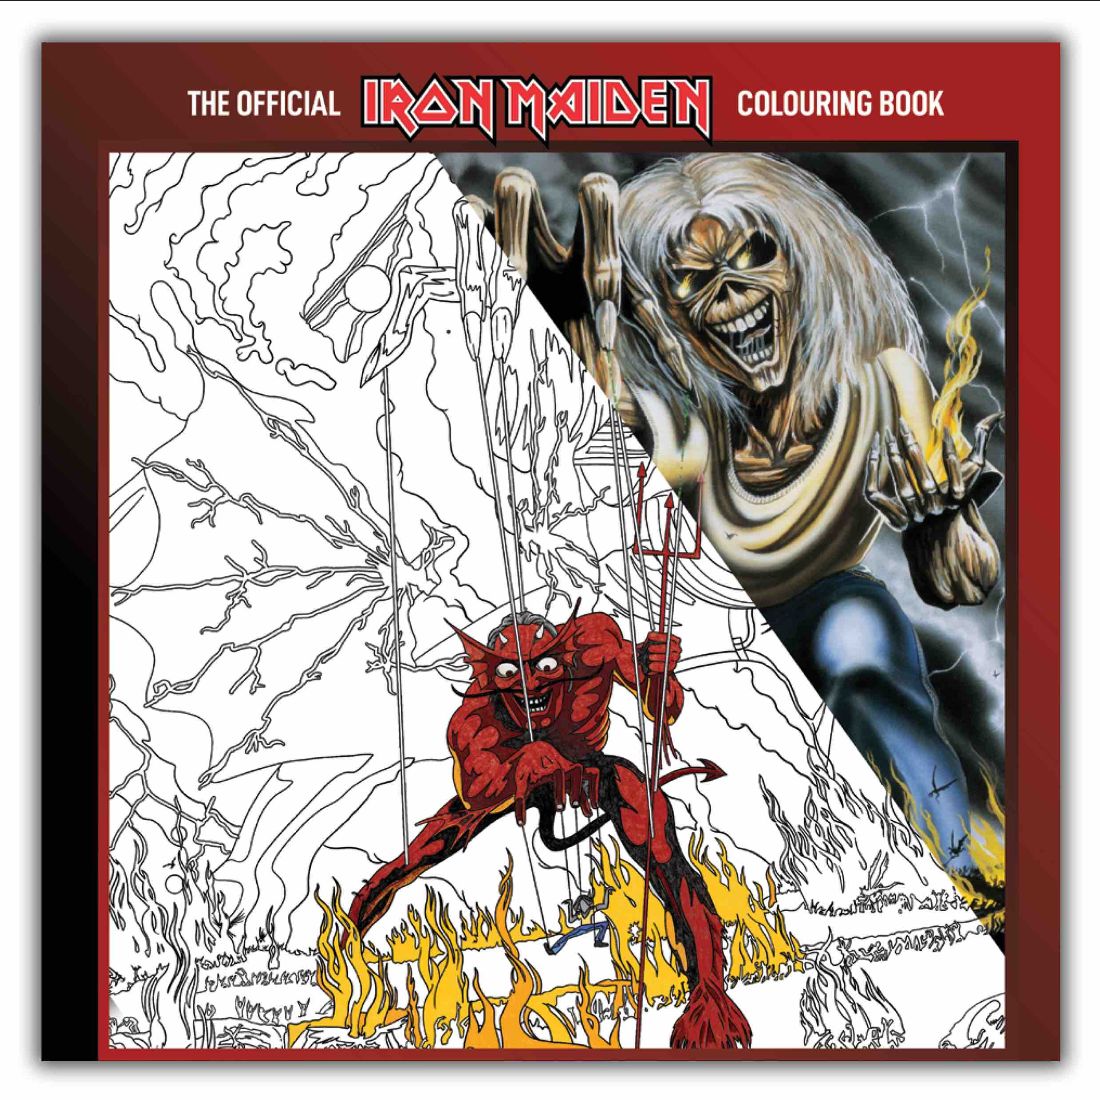 Official Iron Maiden Colouring Book Now Available